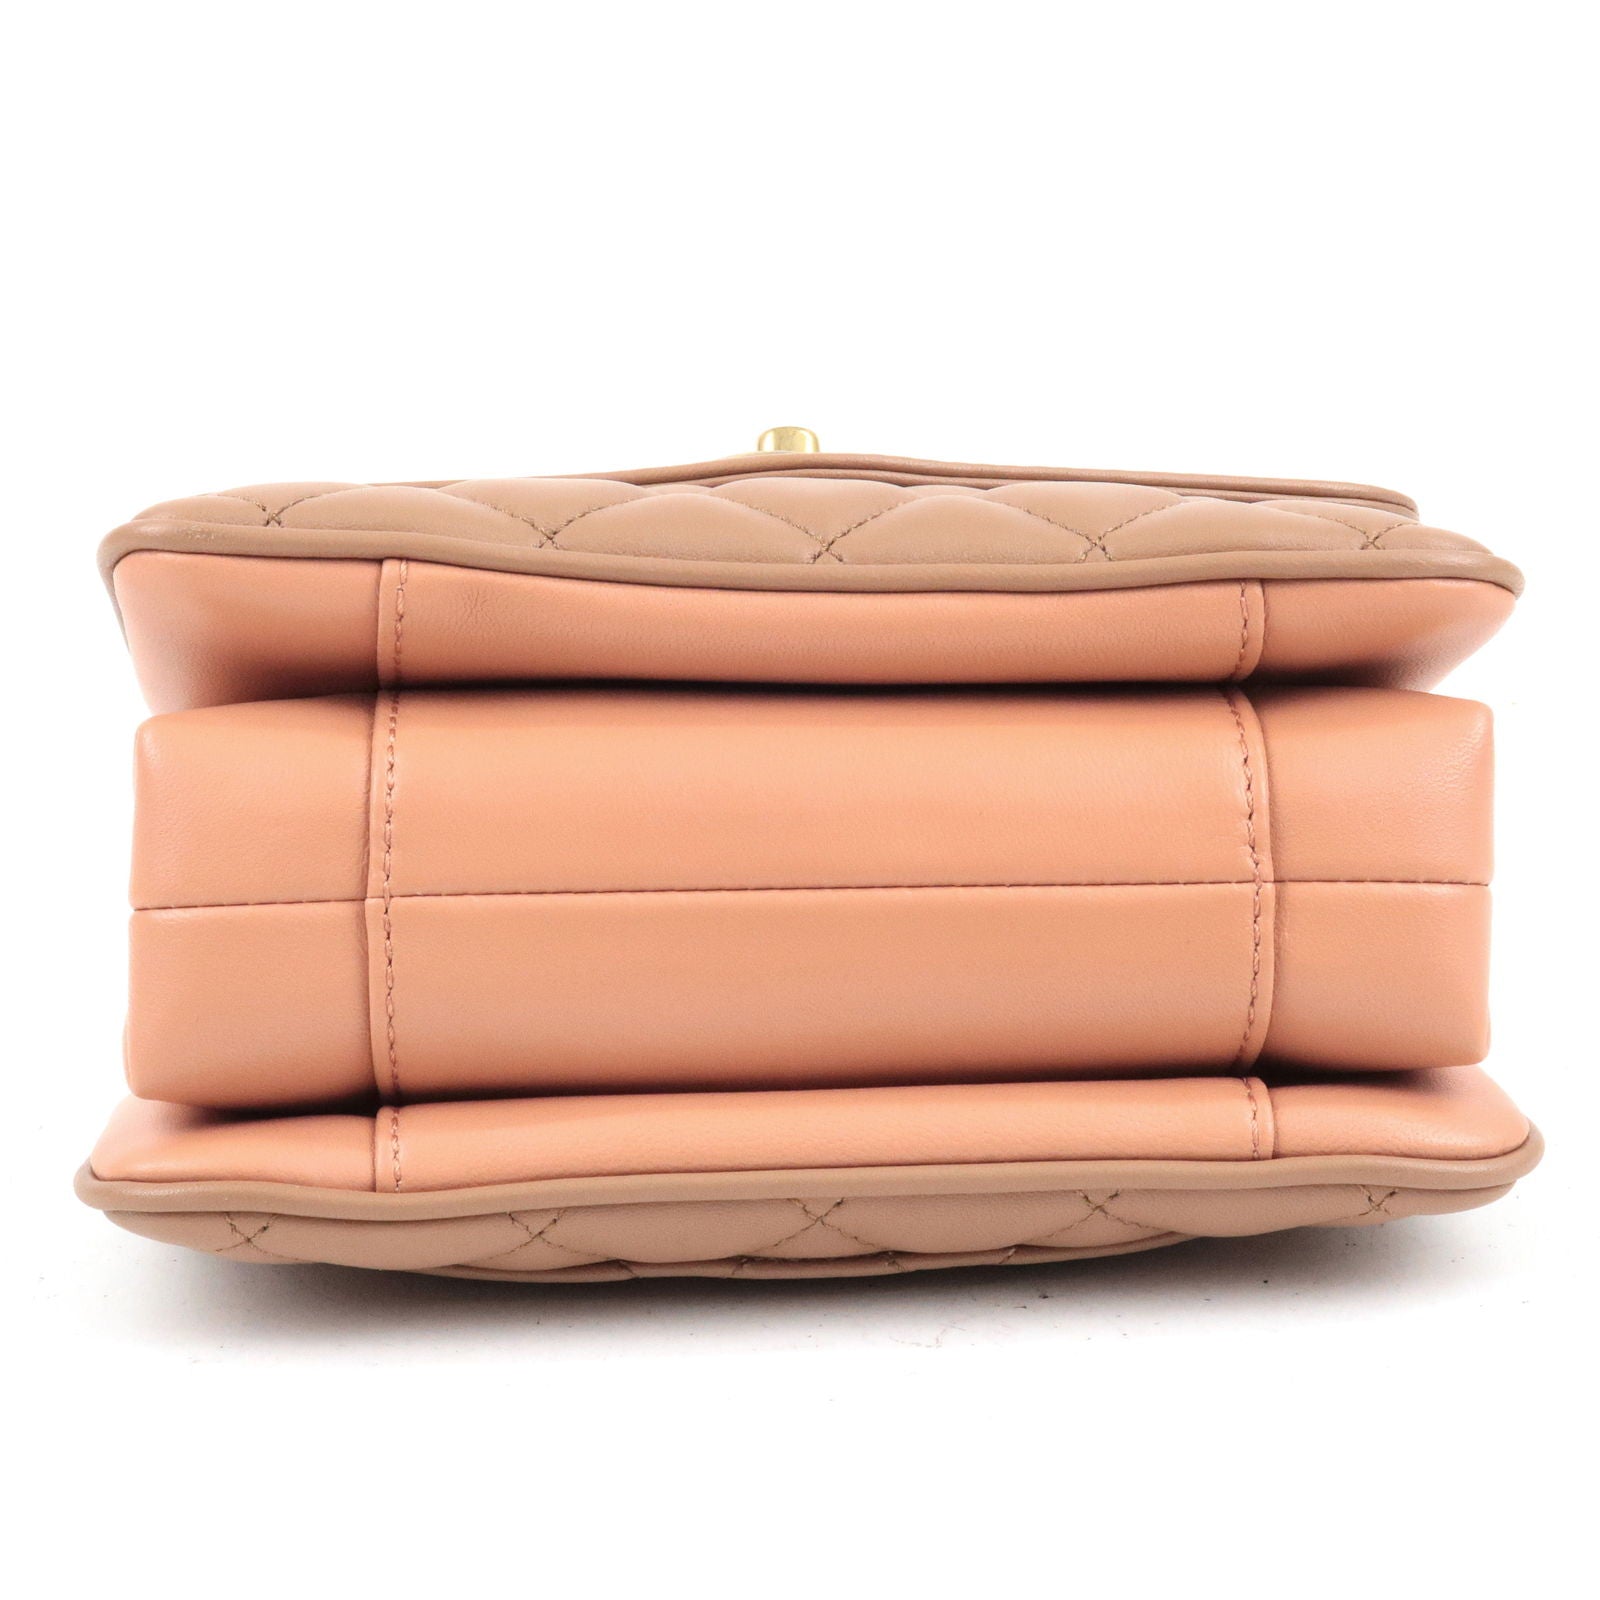 ep_vintage luxury Store - Double - Pink – dct - Skin - Shoulder